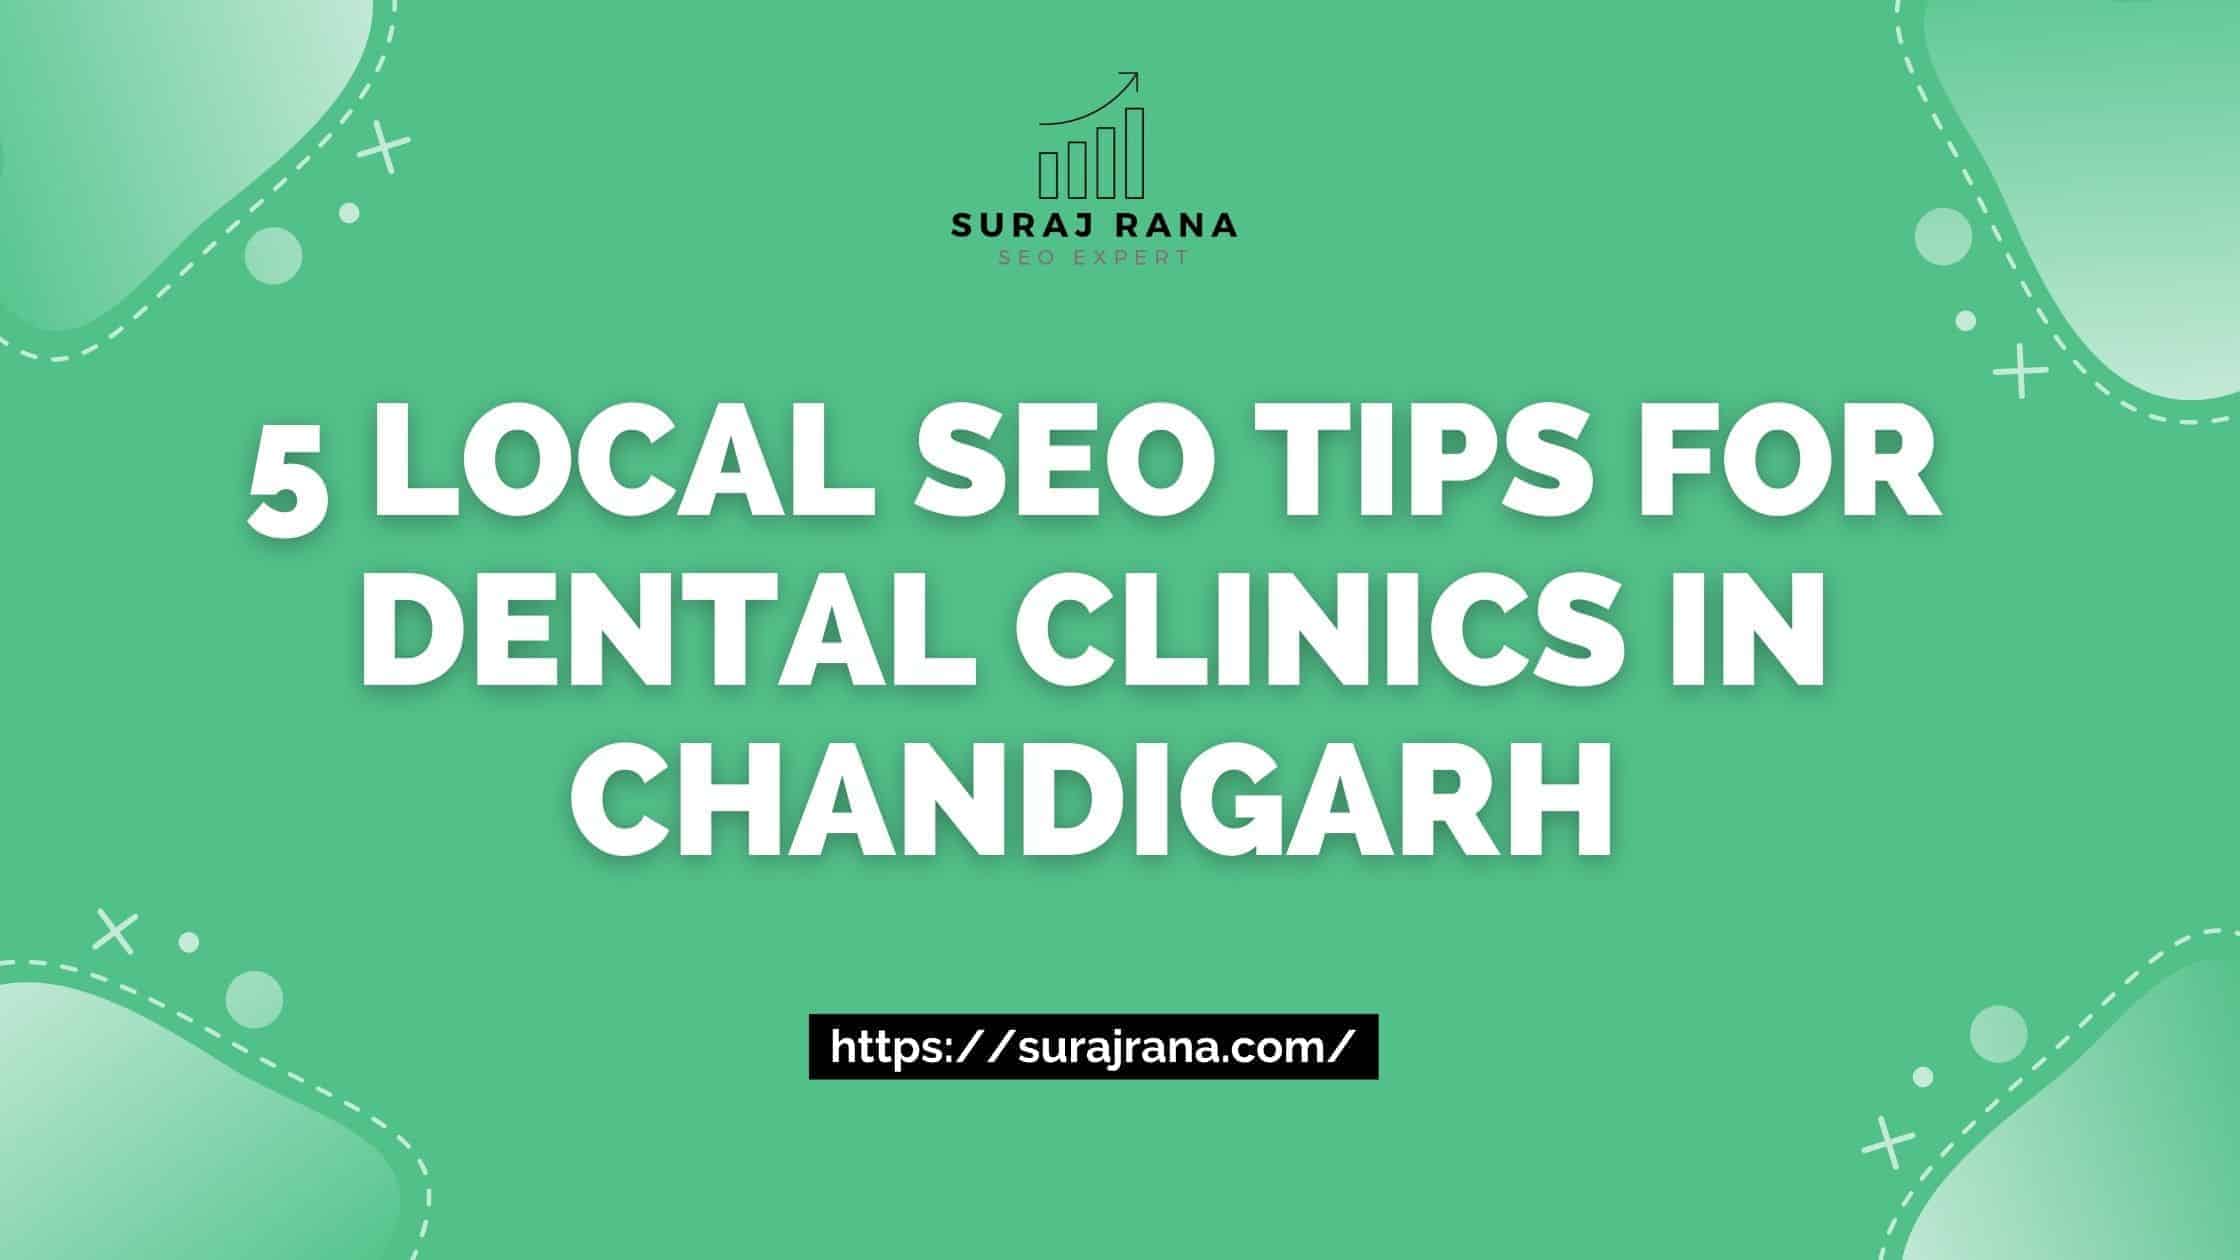 5 Local SEO Tips for Dental Clinics in Chandigarh